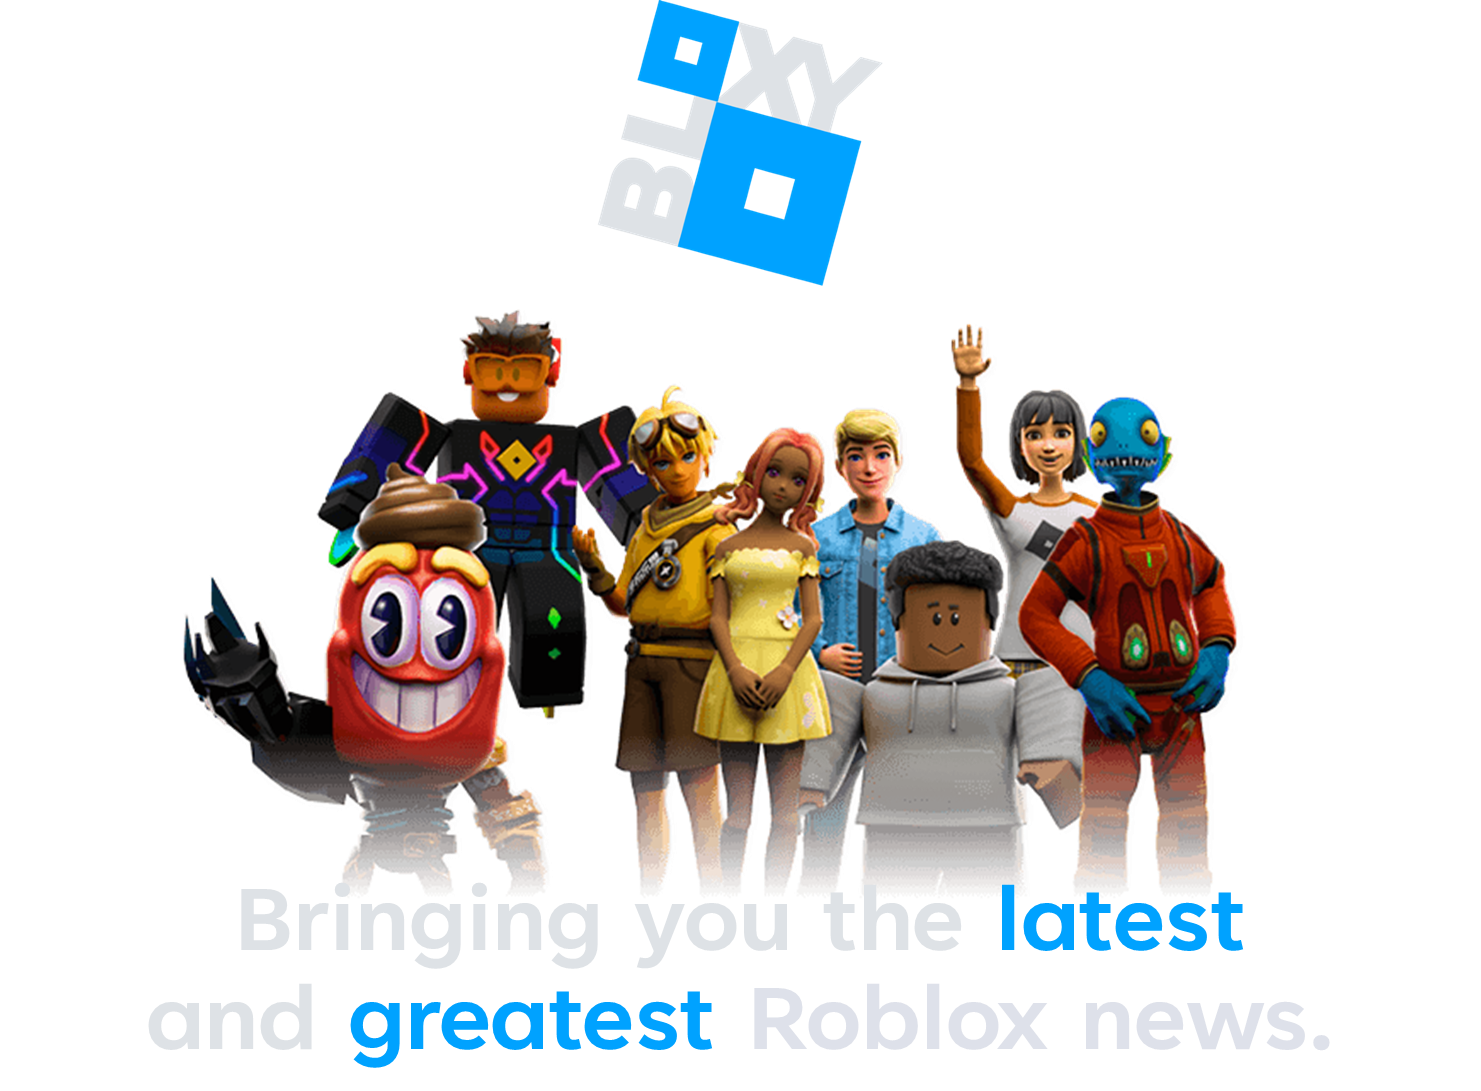 Bloxy news - Free Character Today Go And Grab it Now By